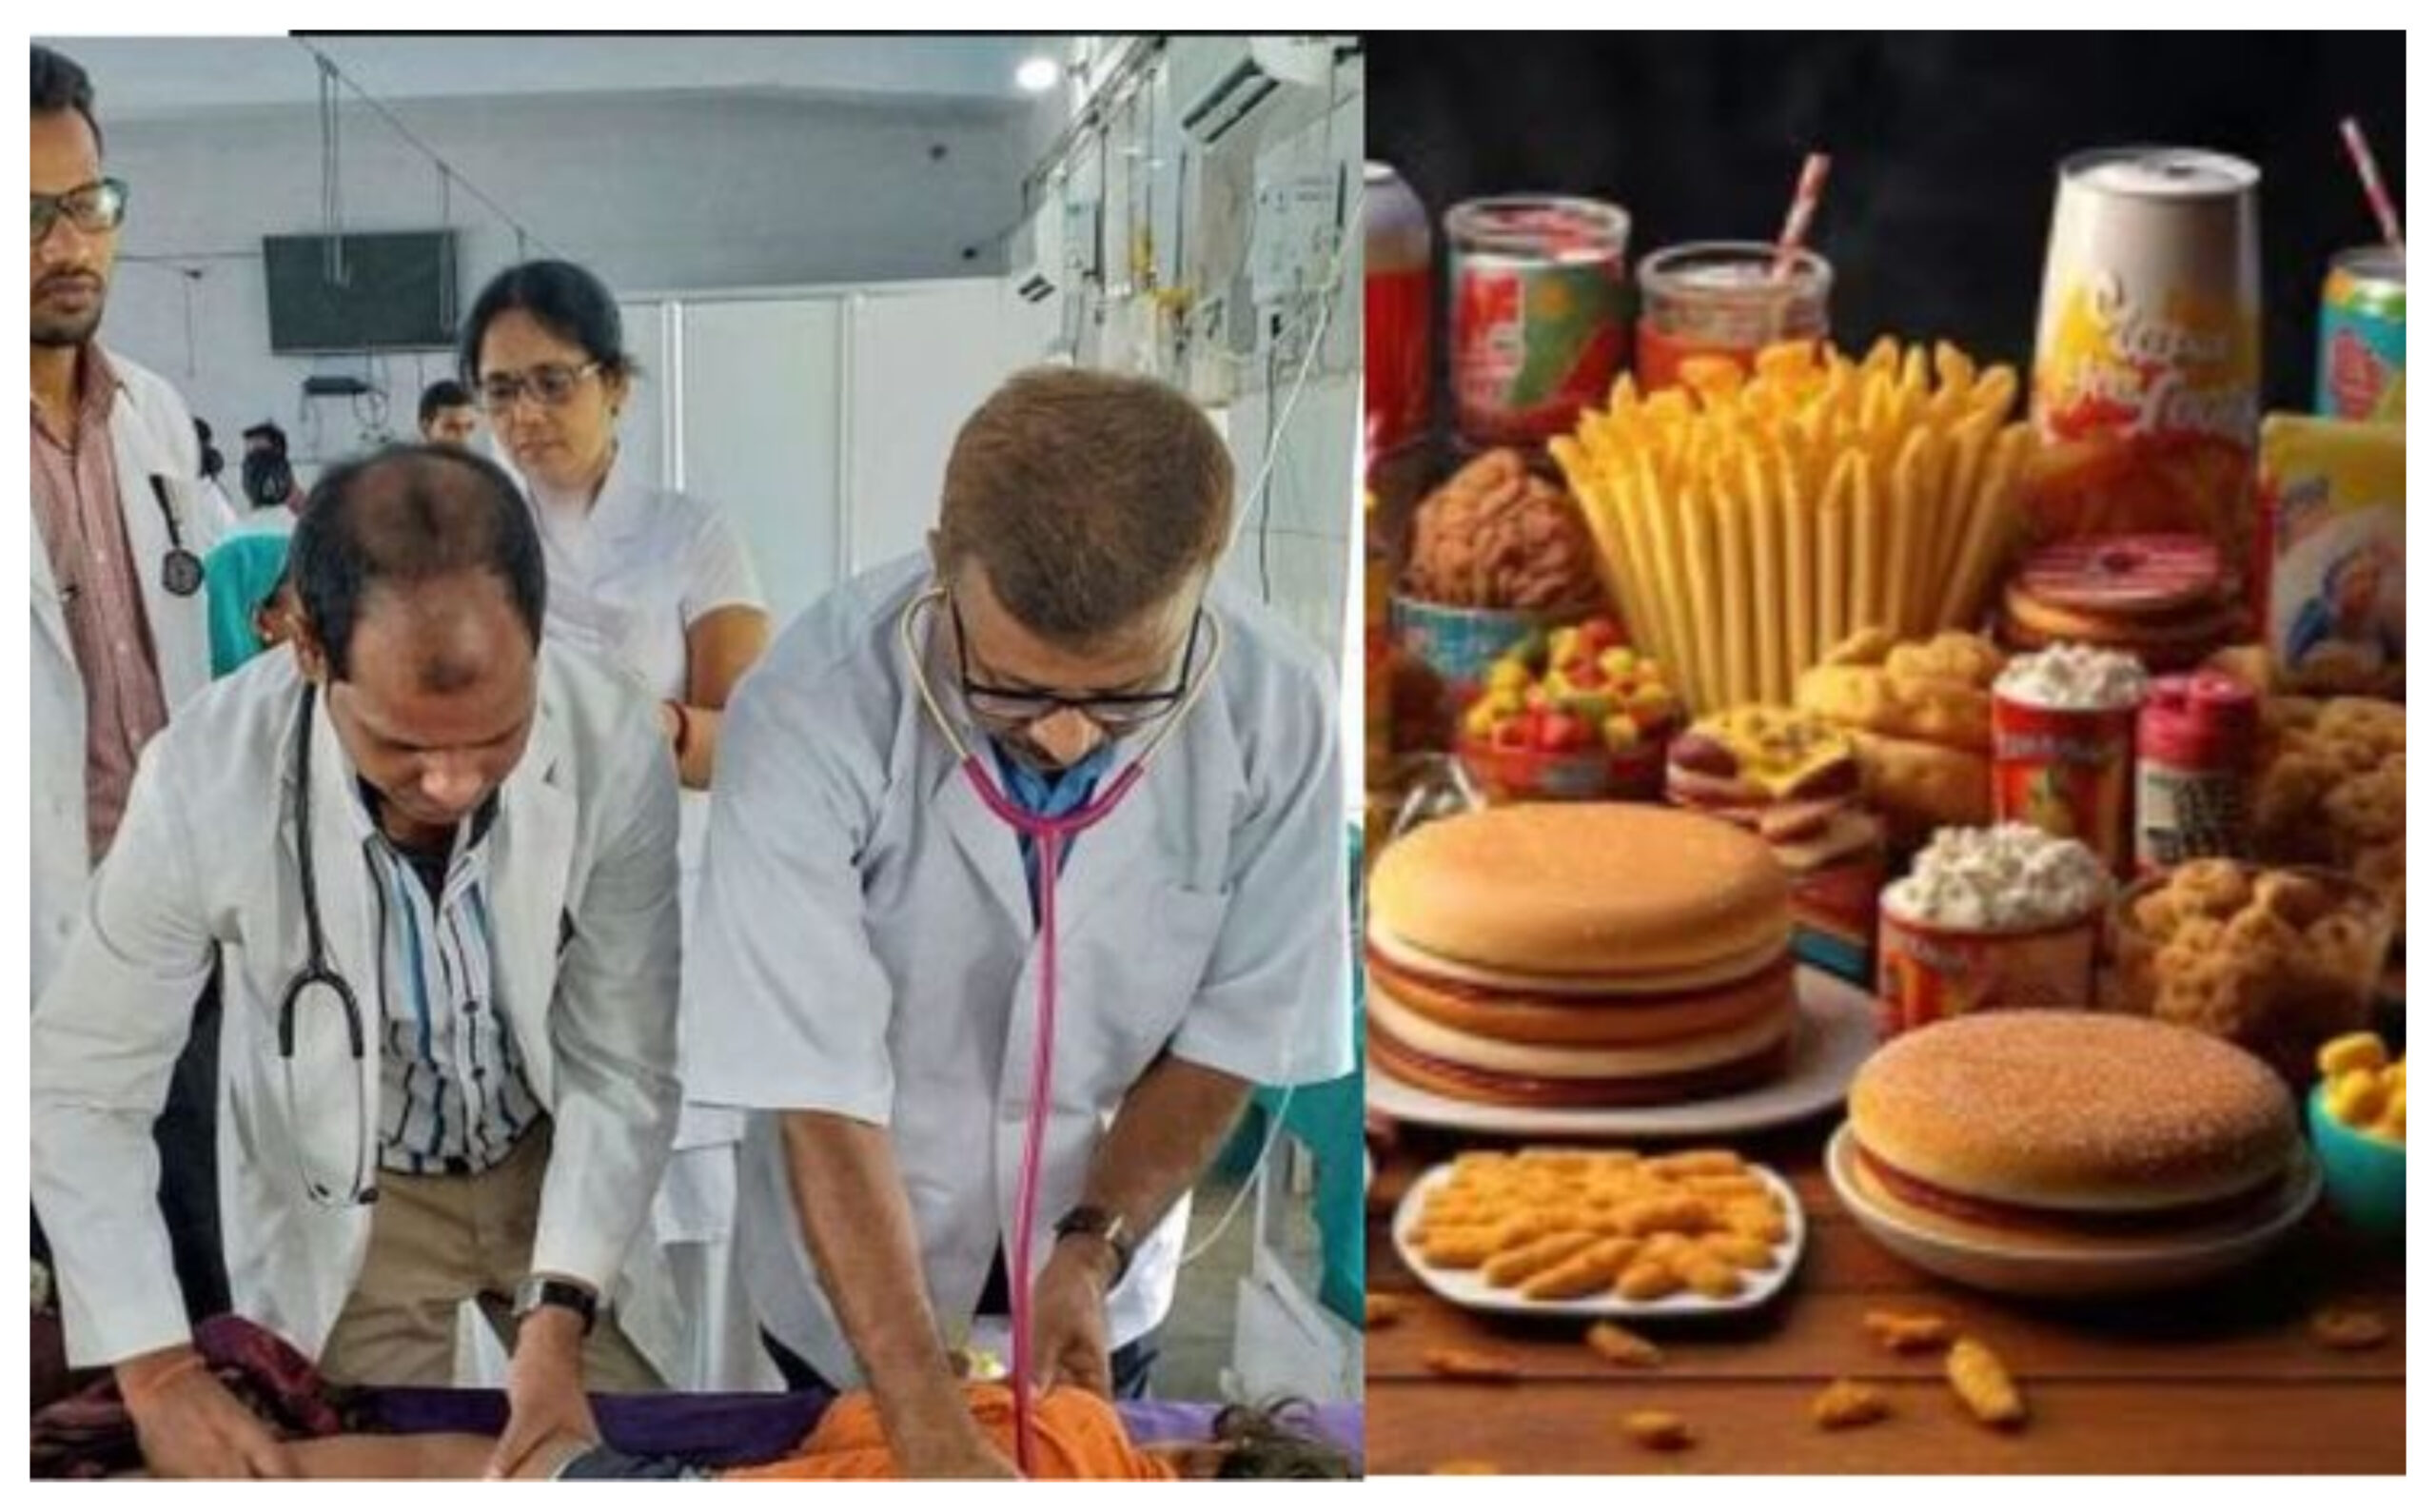 ICMR-Unhealthy Food: Unhealthy food is the cause of diseases,#nationalinstituteofnutrition, #unhealthy, #unhealthyfood, #disease, #diet, #dietary, #doctor, #sick, #fatloss, #Nutrition, ICMR released report, icmr-says-more-than-56-percent-indian-disease-burden-due-to-unhealthy-diets, ICMR, National Institute of Nutrition, unhealthy diets, disease, dietary restrictions, totaltv live-youtube-facebook-google-twitter-amazon,total news in hindi